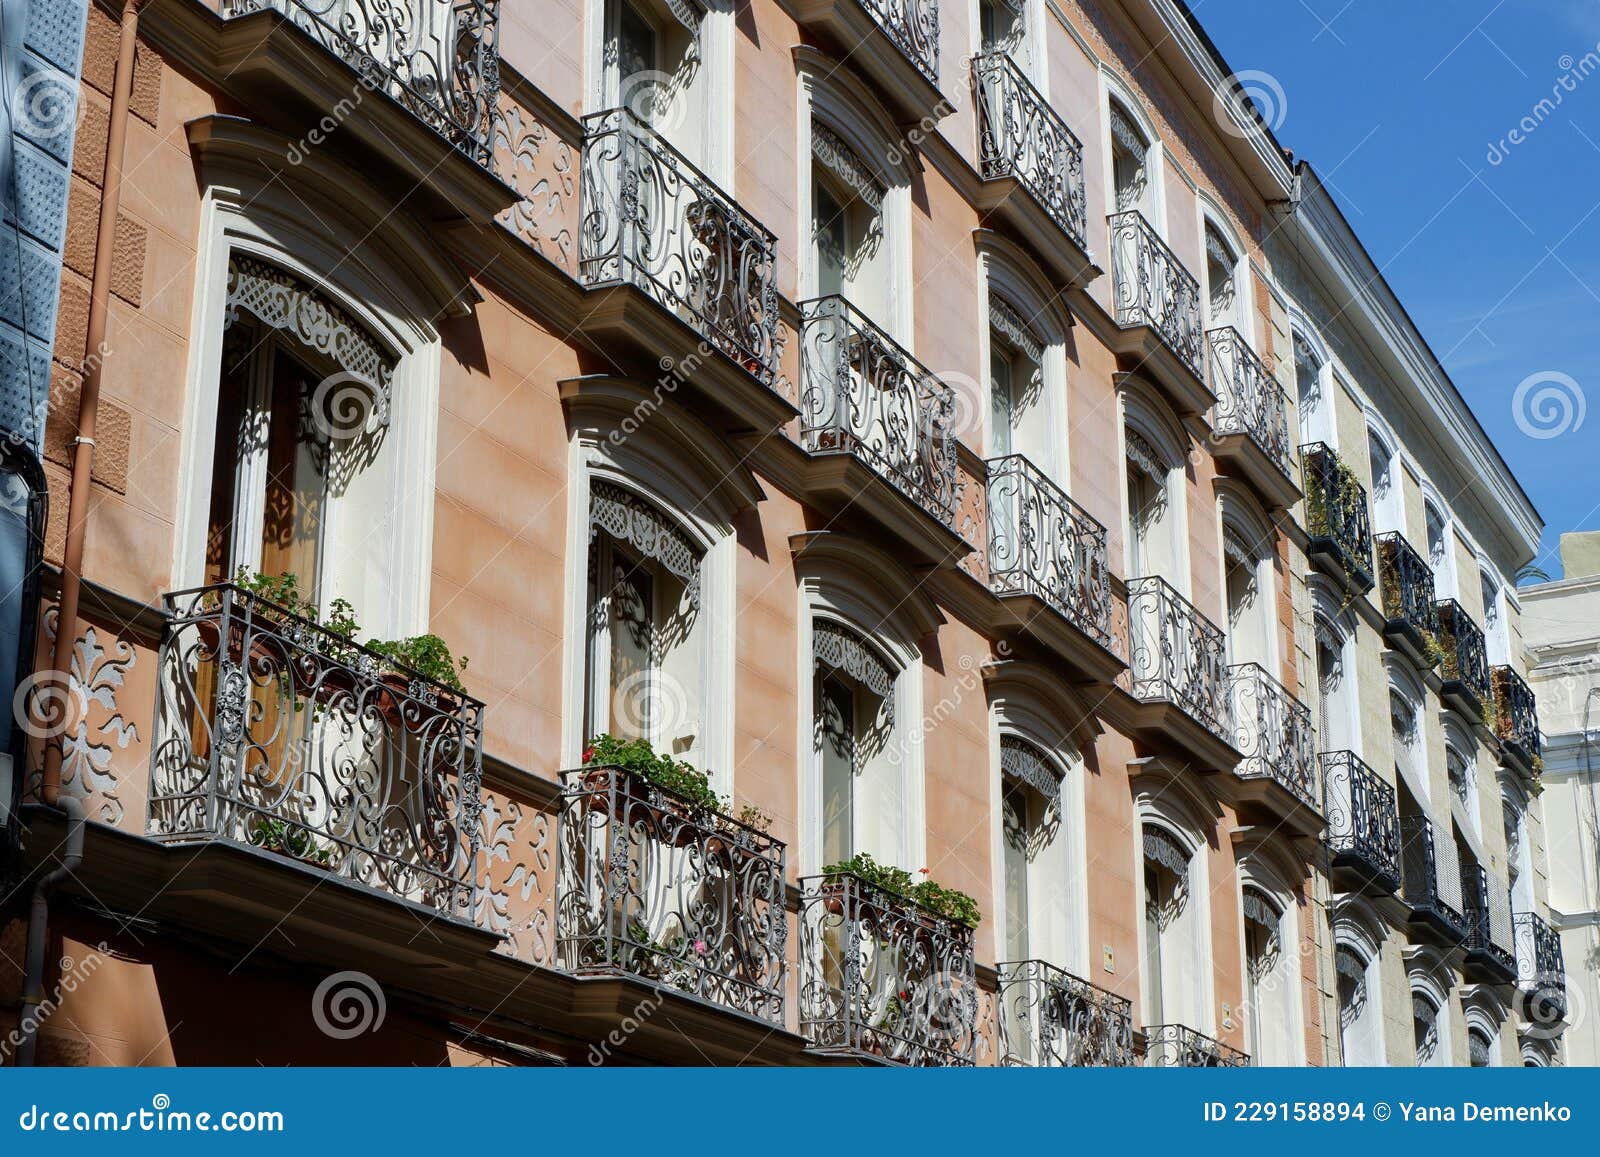 classical vintage building facade with small elegant balconies in chueca district dowtown madrid